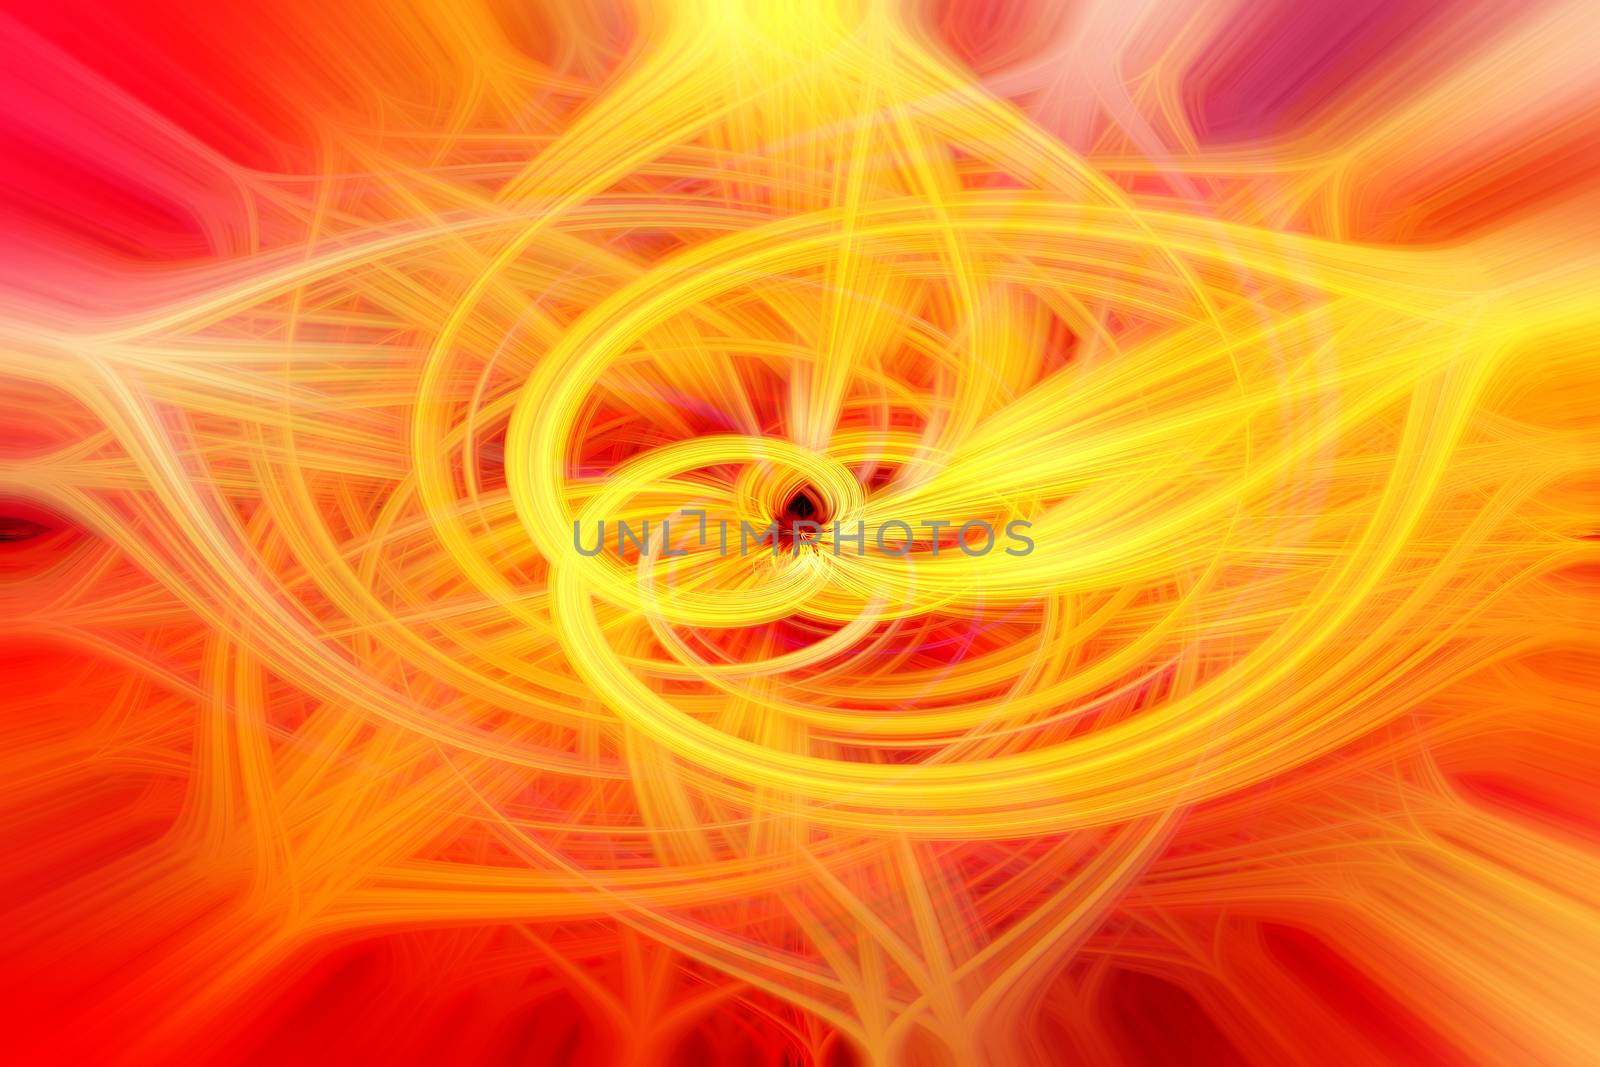 Beautiful abstract intertwined glowing 3d fibers forming a shape of star, sparkle, flame, flower, interlinked hearts. Yellow, orange, and red colors. Illustration by DamantisZ